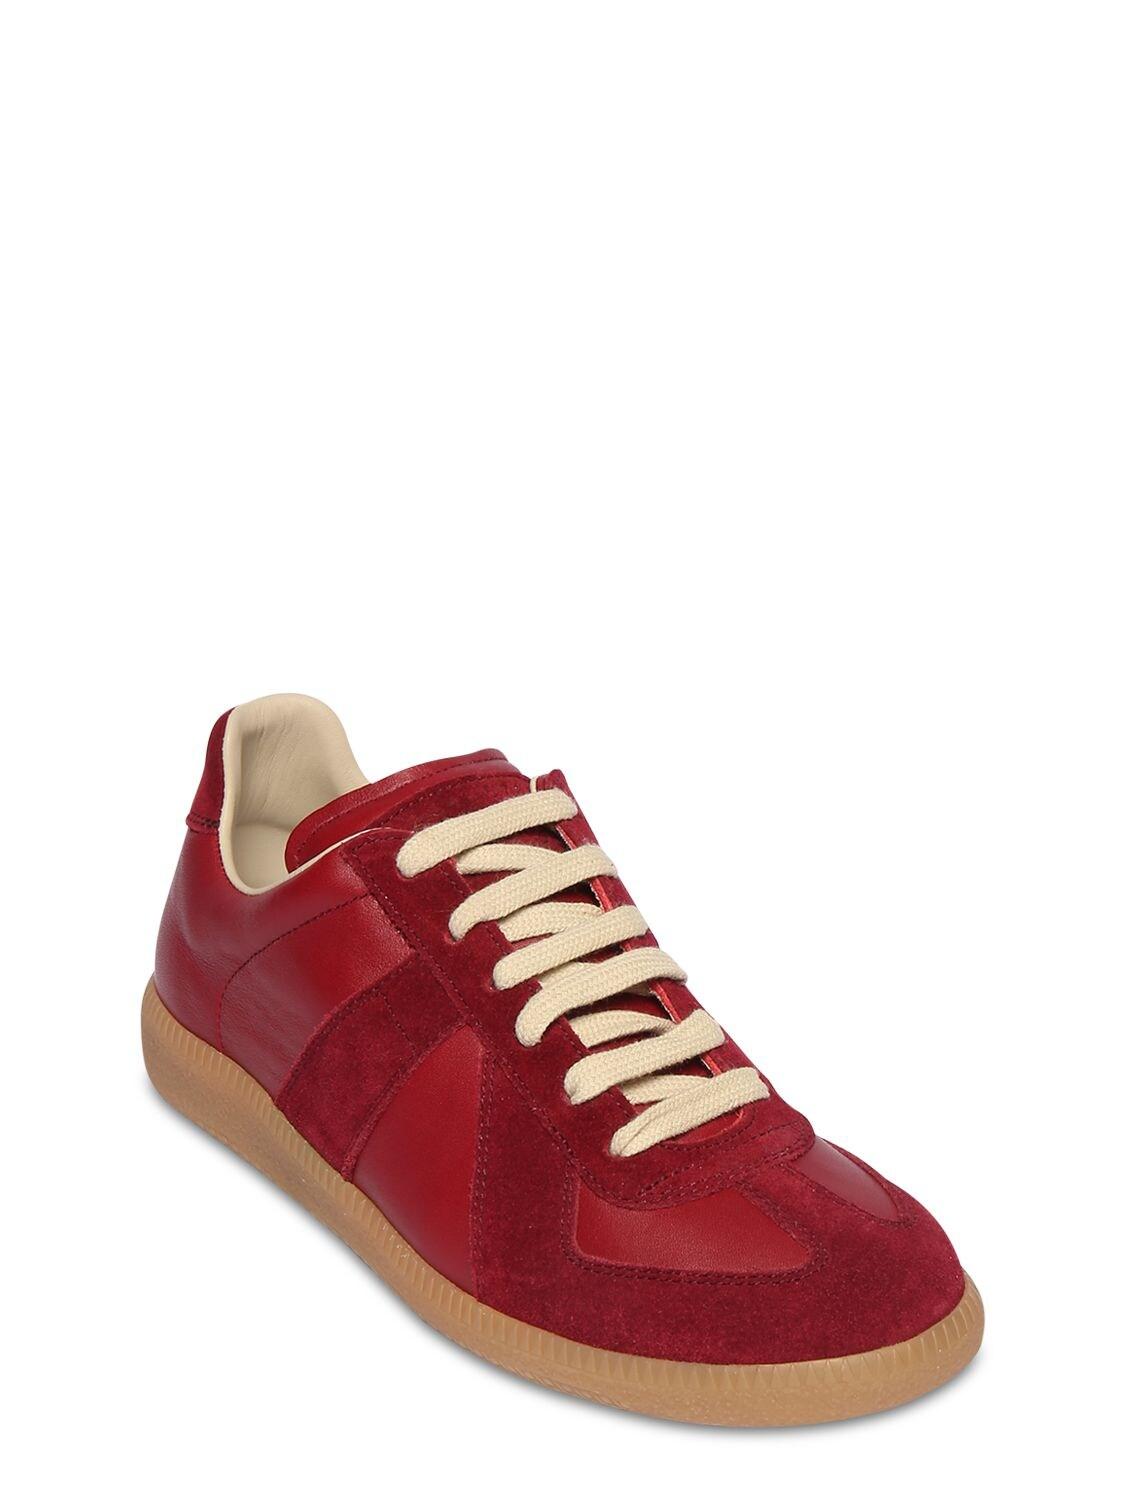 Maison Margiela 20mm Replica Leather & Suede Sneakers in Dark Red (Red ...